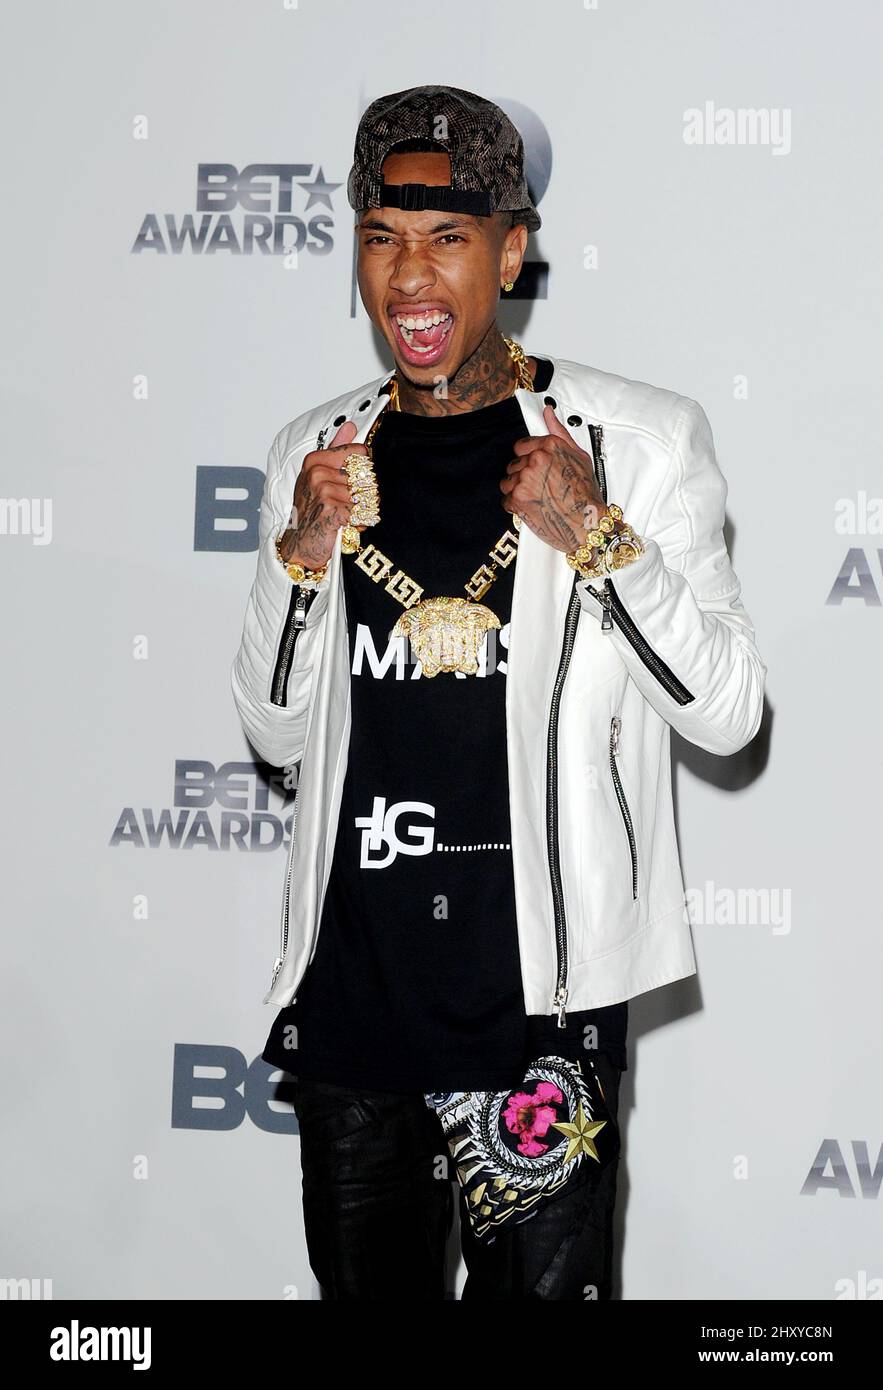 Tyga backstage at the BET Awards on Sunday, July 1, 2012, in Los Angeles. Stock Photo